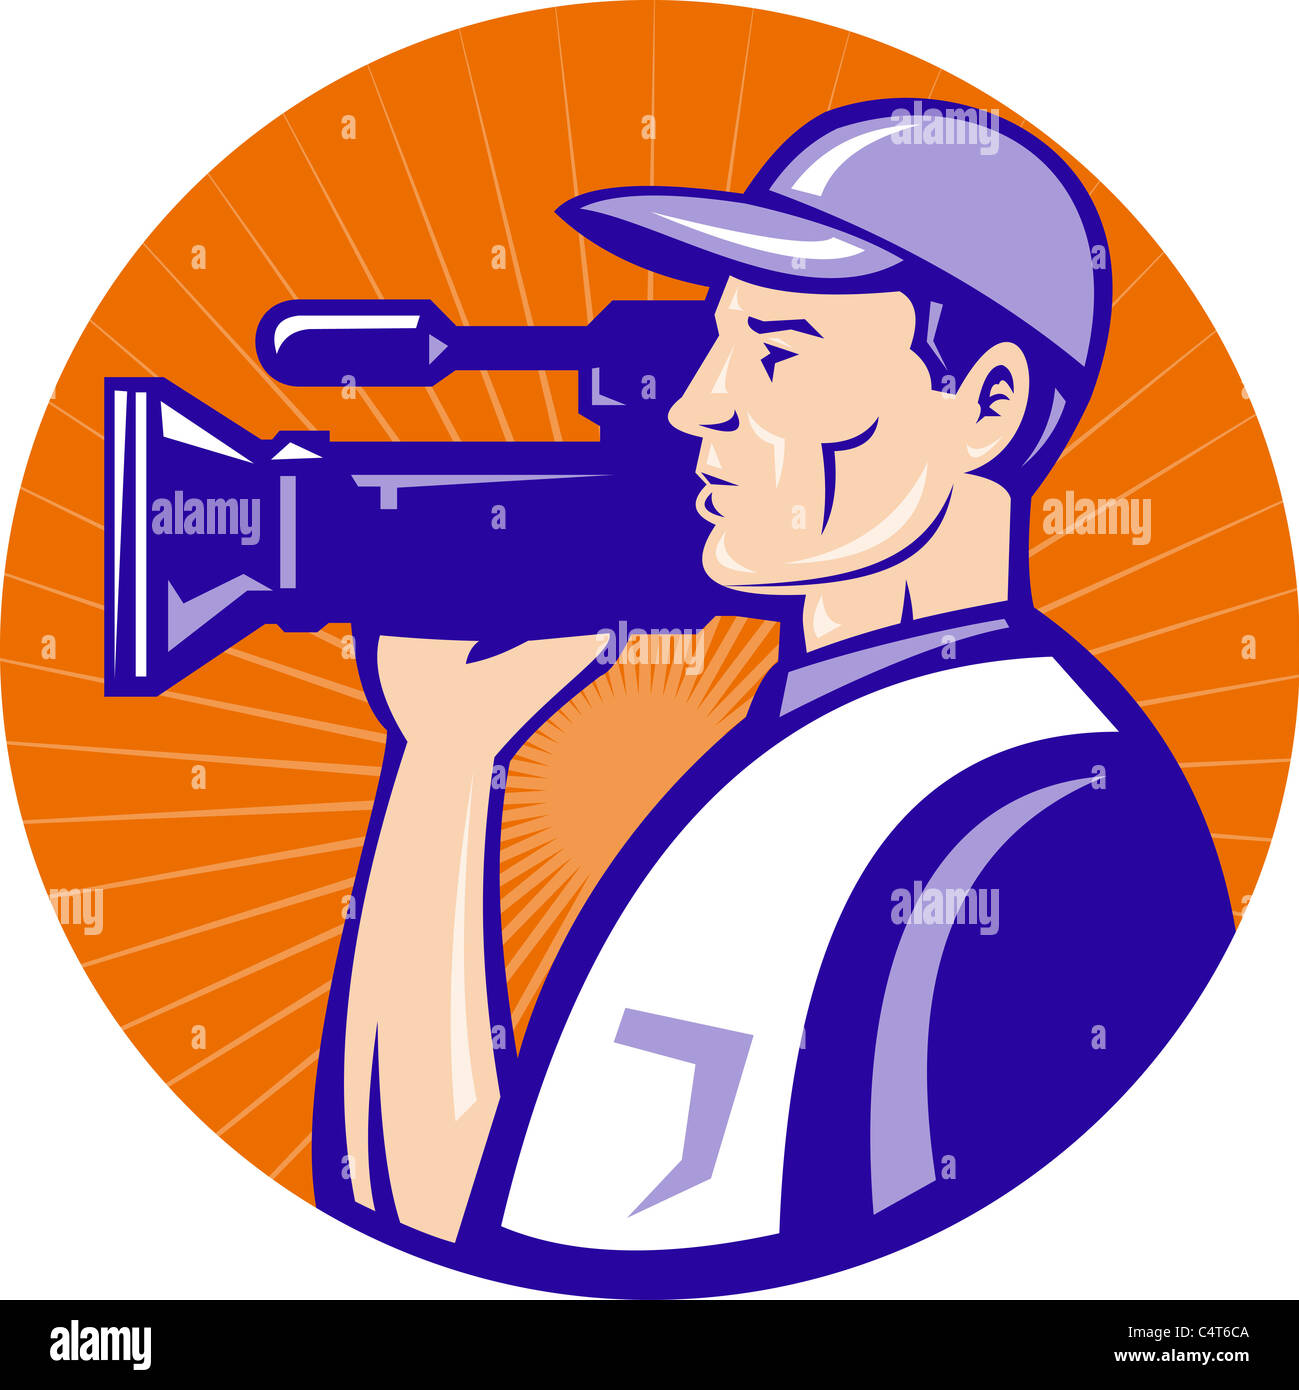 illustration of a cameraman film crew shooting with video movie camera set inside circle done in retro style Stock Photo